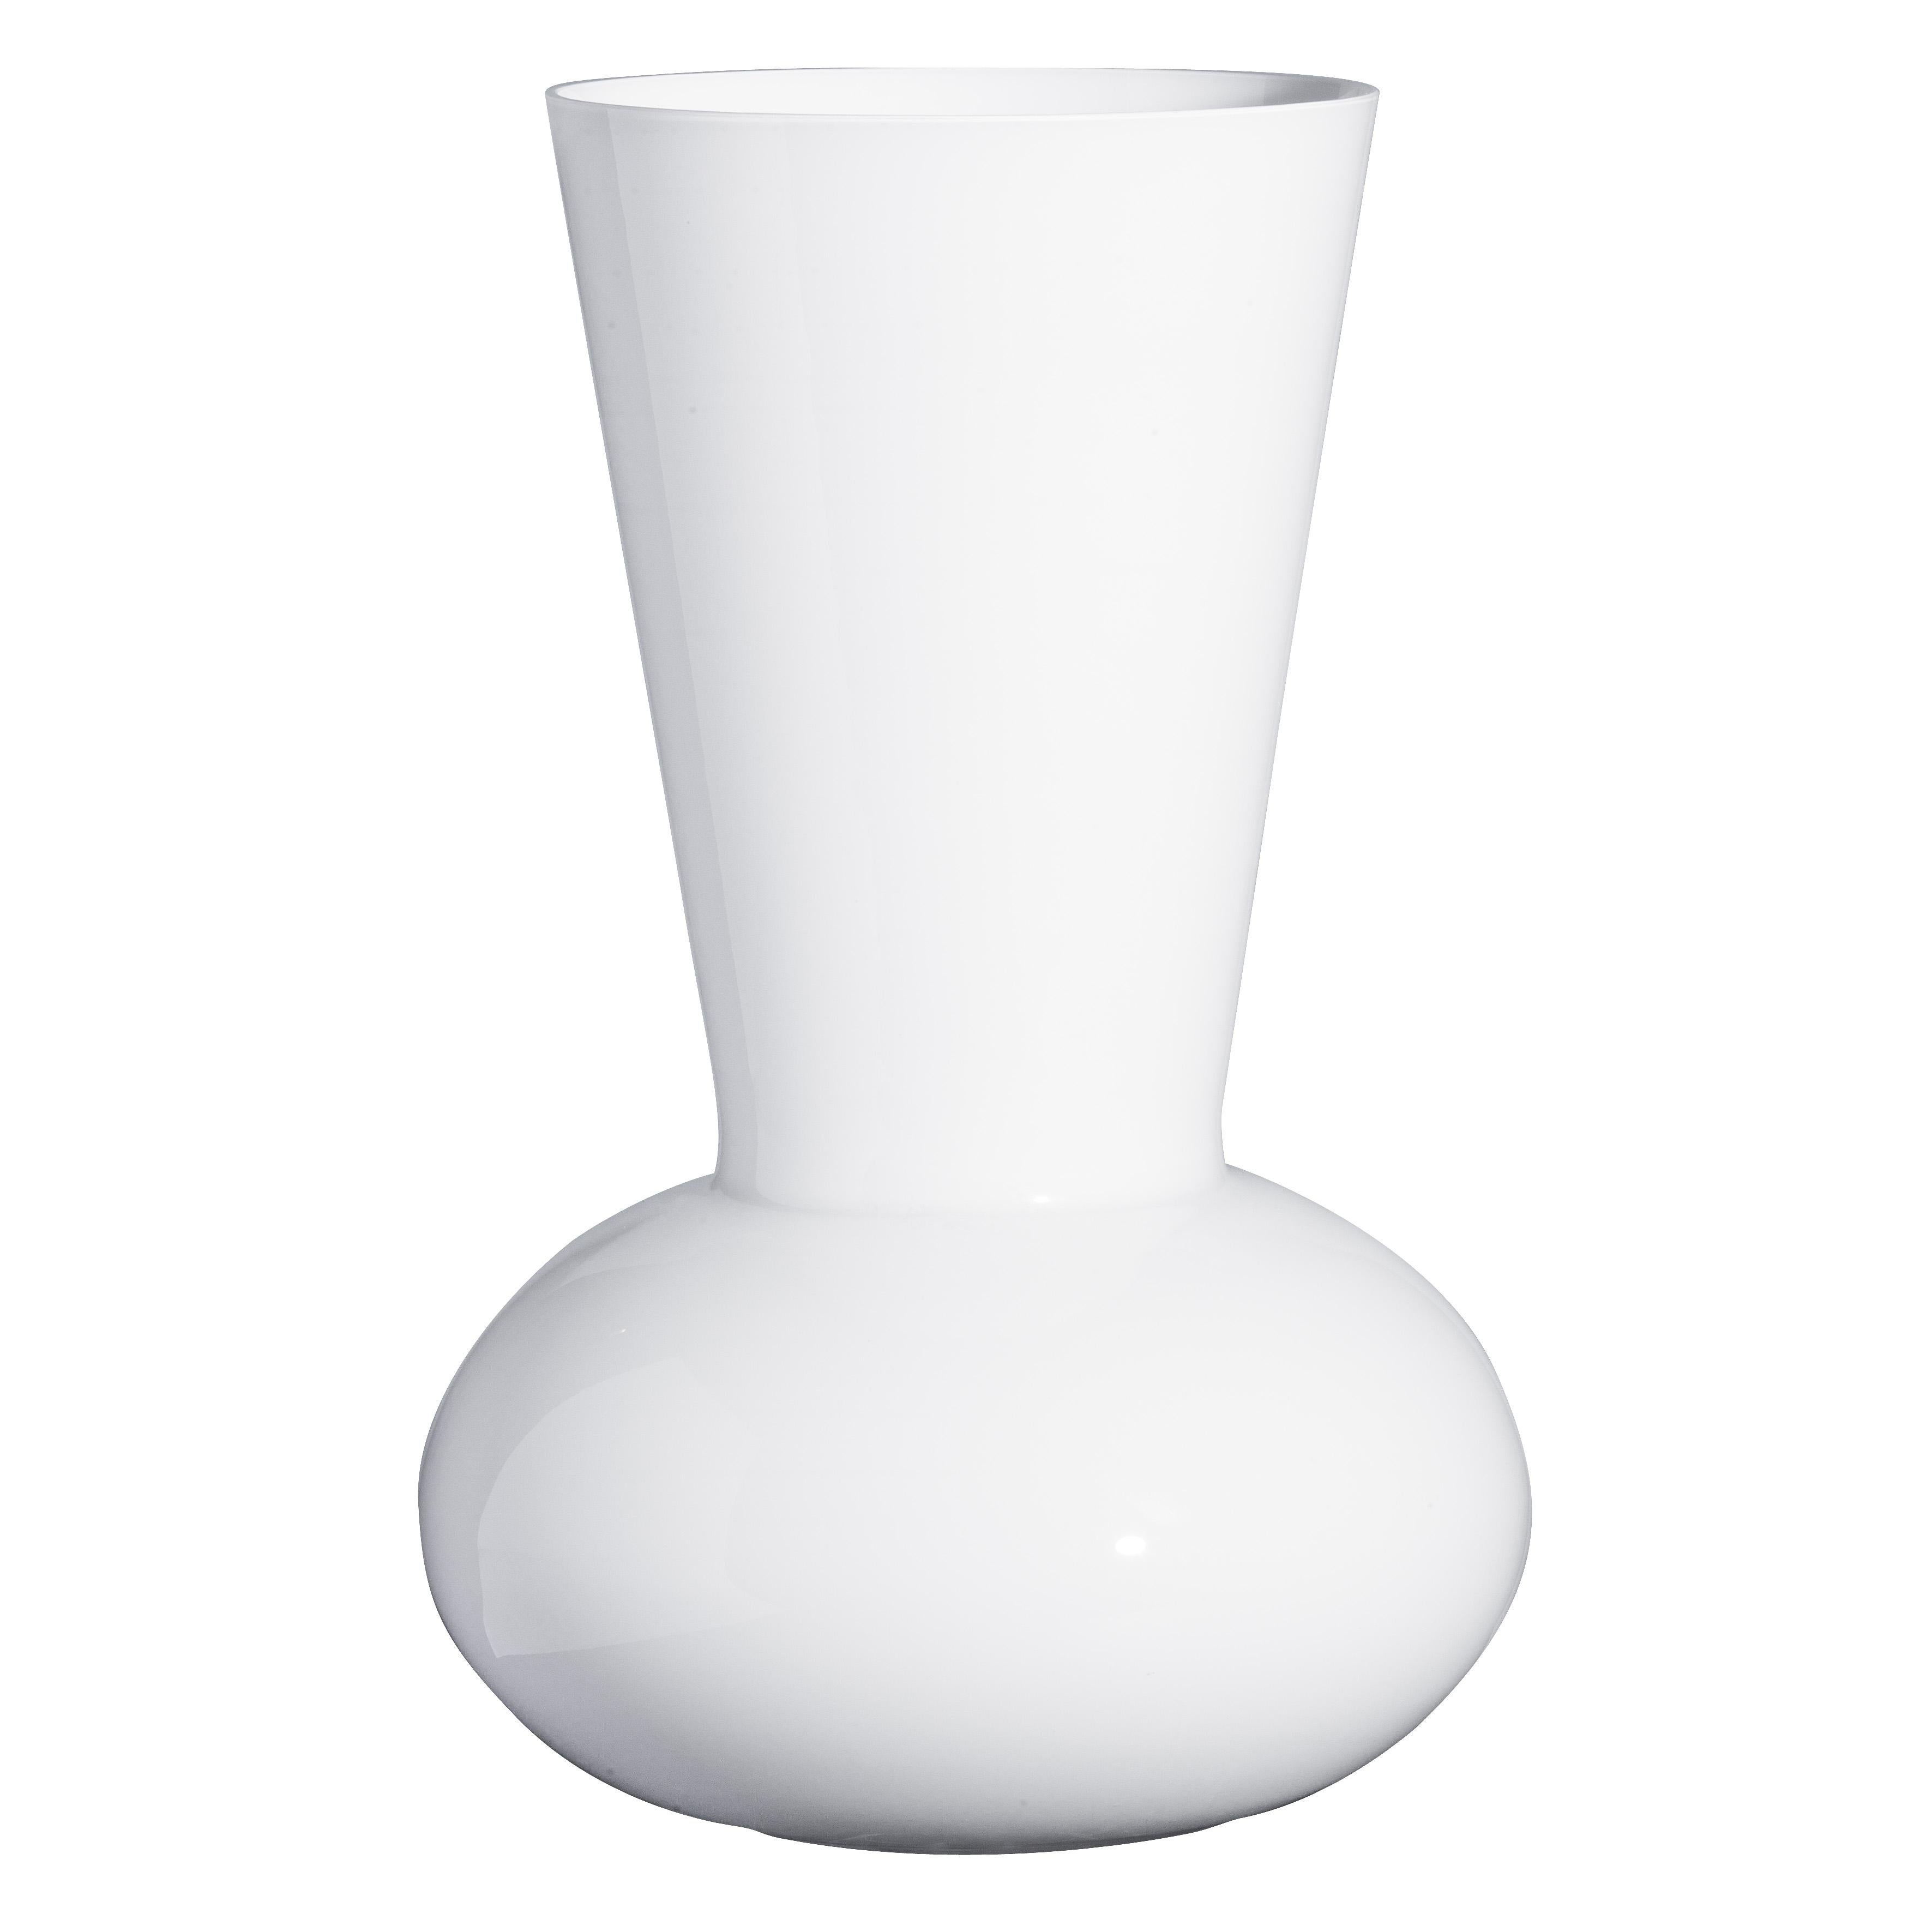 Large Troncosfera Vase in White by Carlo Moretti For Sale